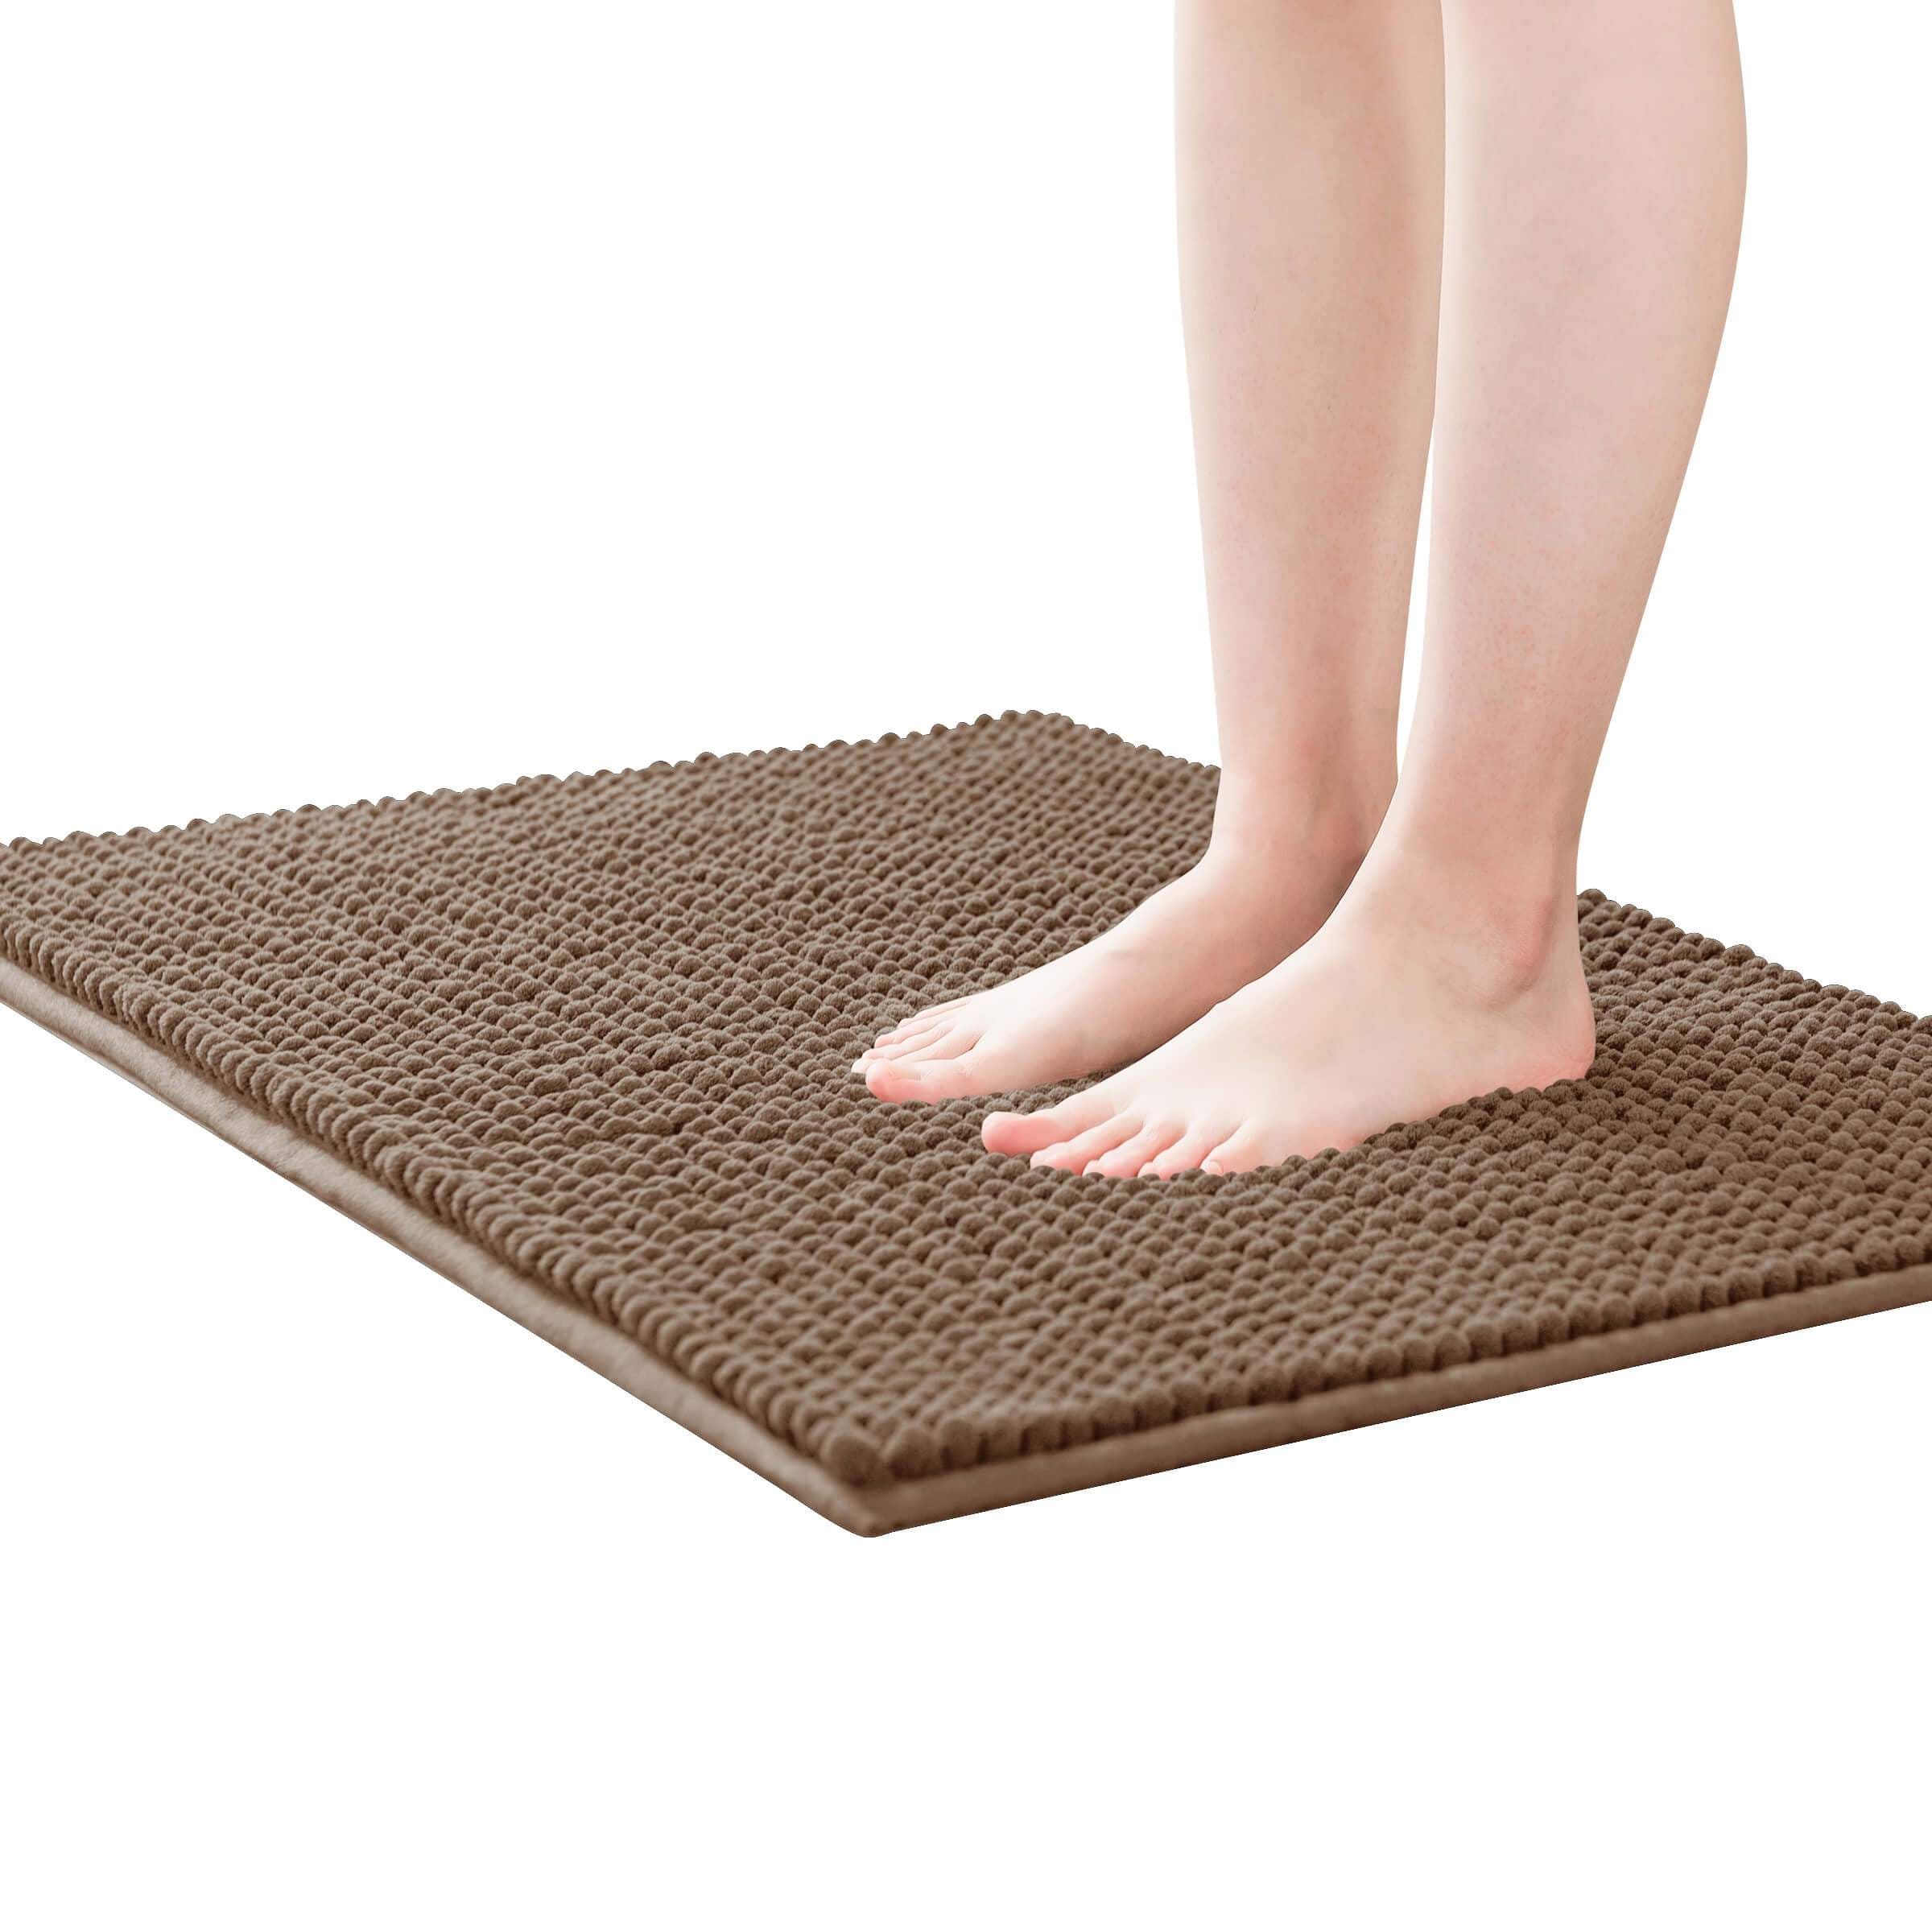 https://ak1.ostkcdn.com/images/products/is/images/direct/871173680608ab5e82b4a15f7957c0f939387ddb/Subrtex-Chenille-Bathroom-Rugs-Soft-Super-Water-Absorbing-Shower-Mats.jpg